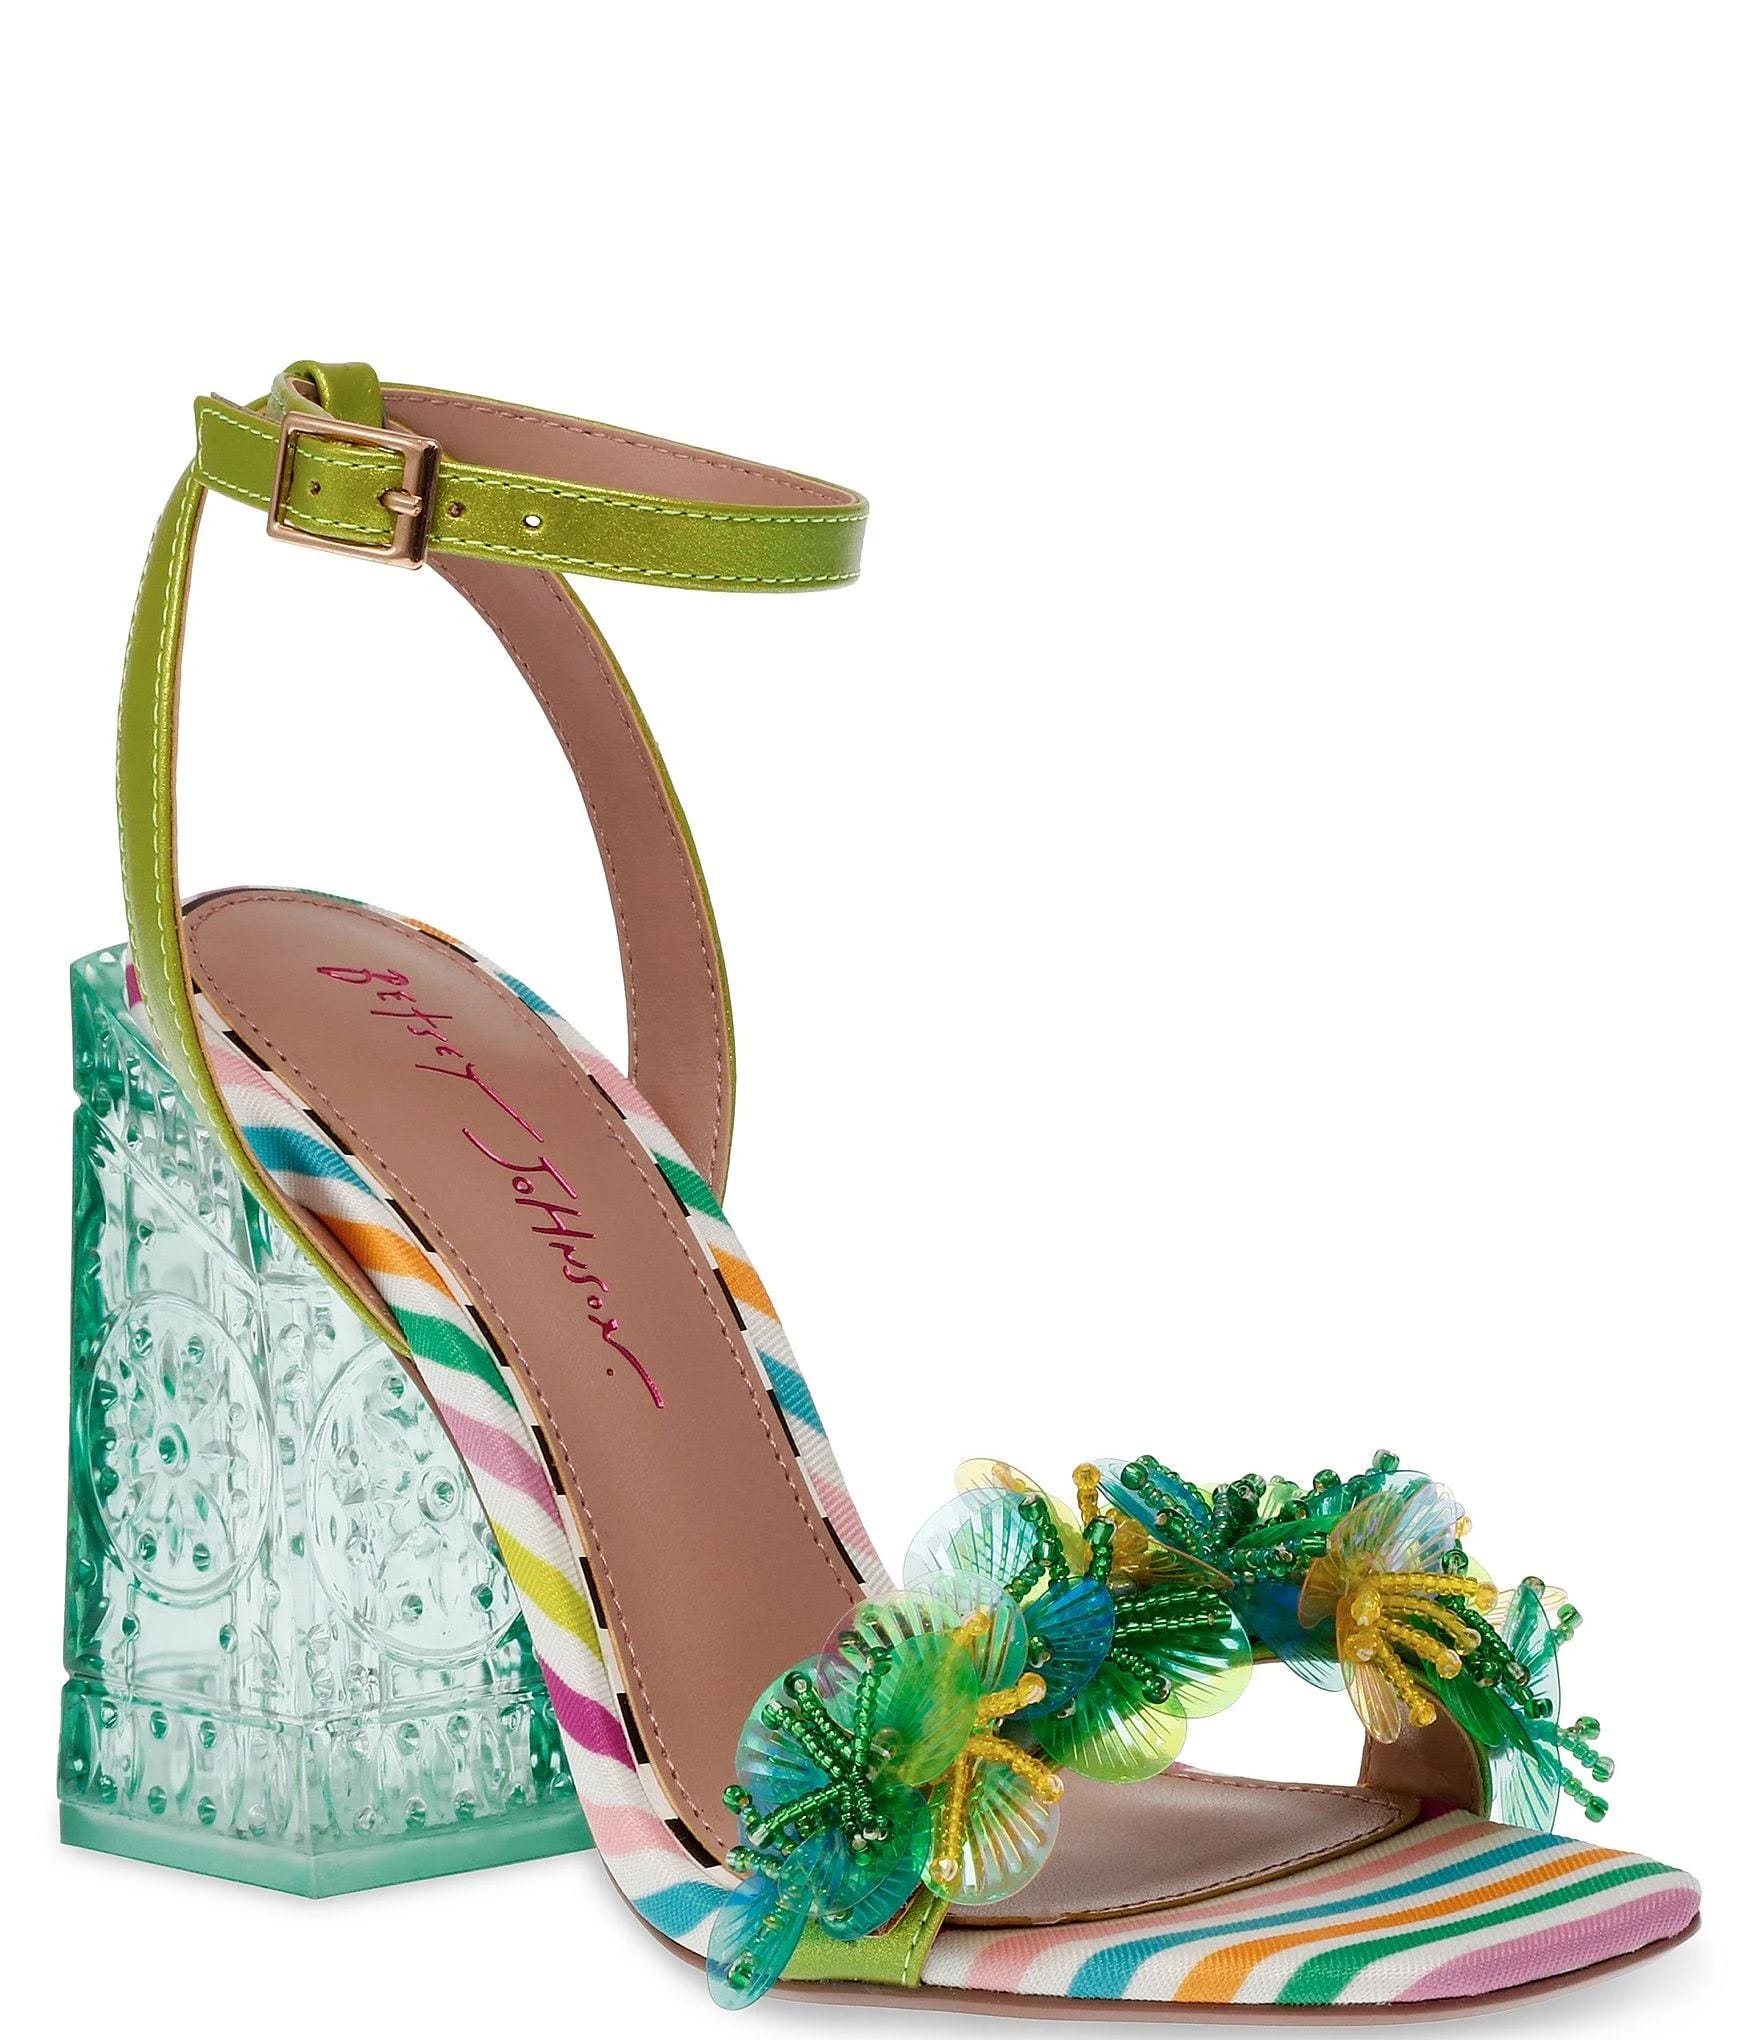 Stylish Beaded Heels Clear Block Sandals by Betsey Johnson | Image